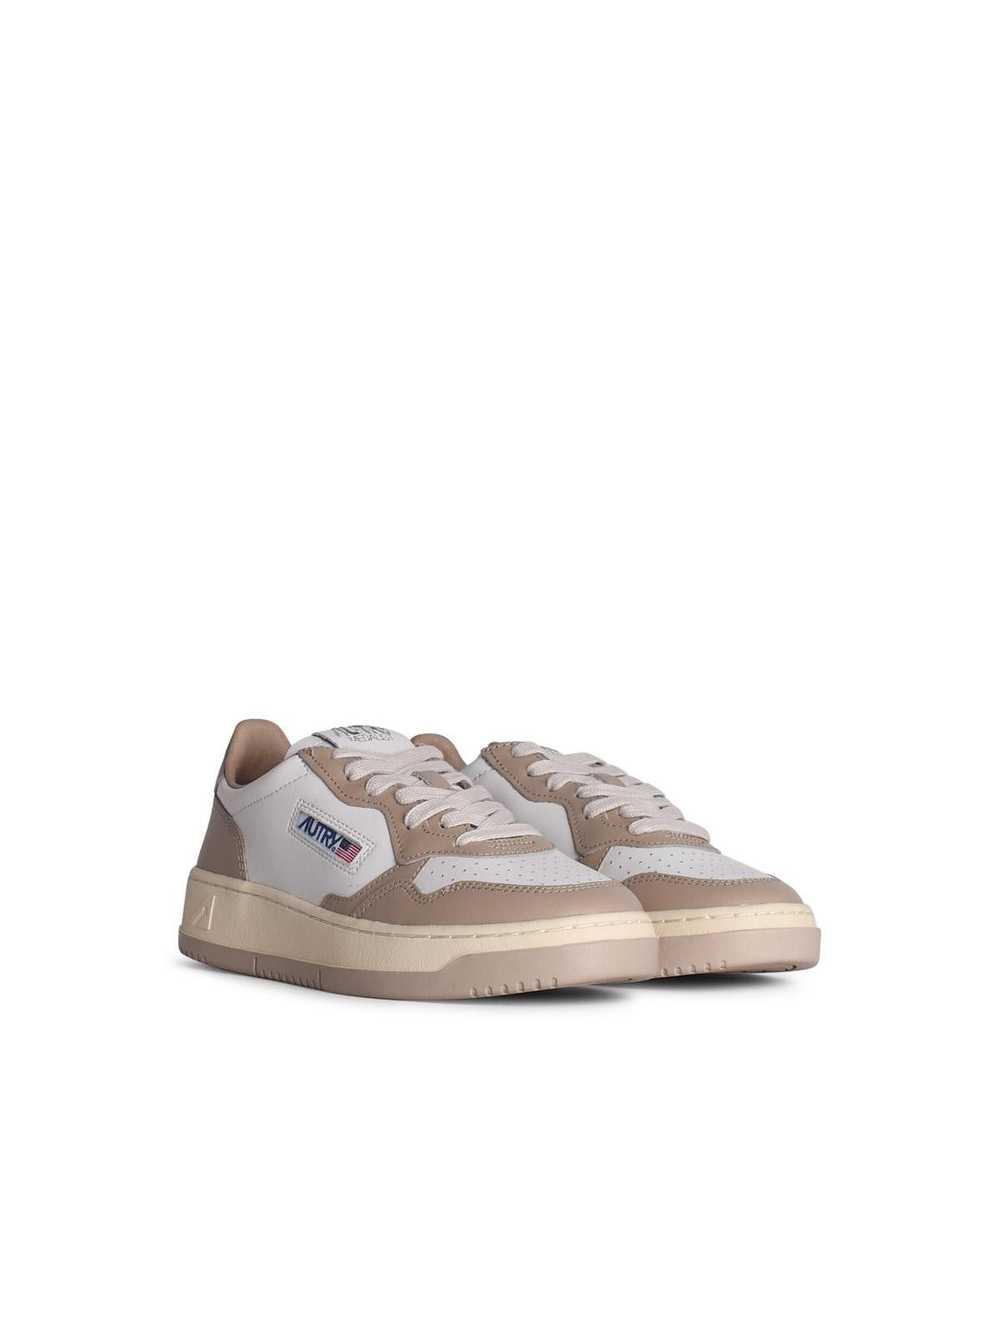 Autry Autry 'medalist' White Leather Sneakers - image 2